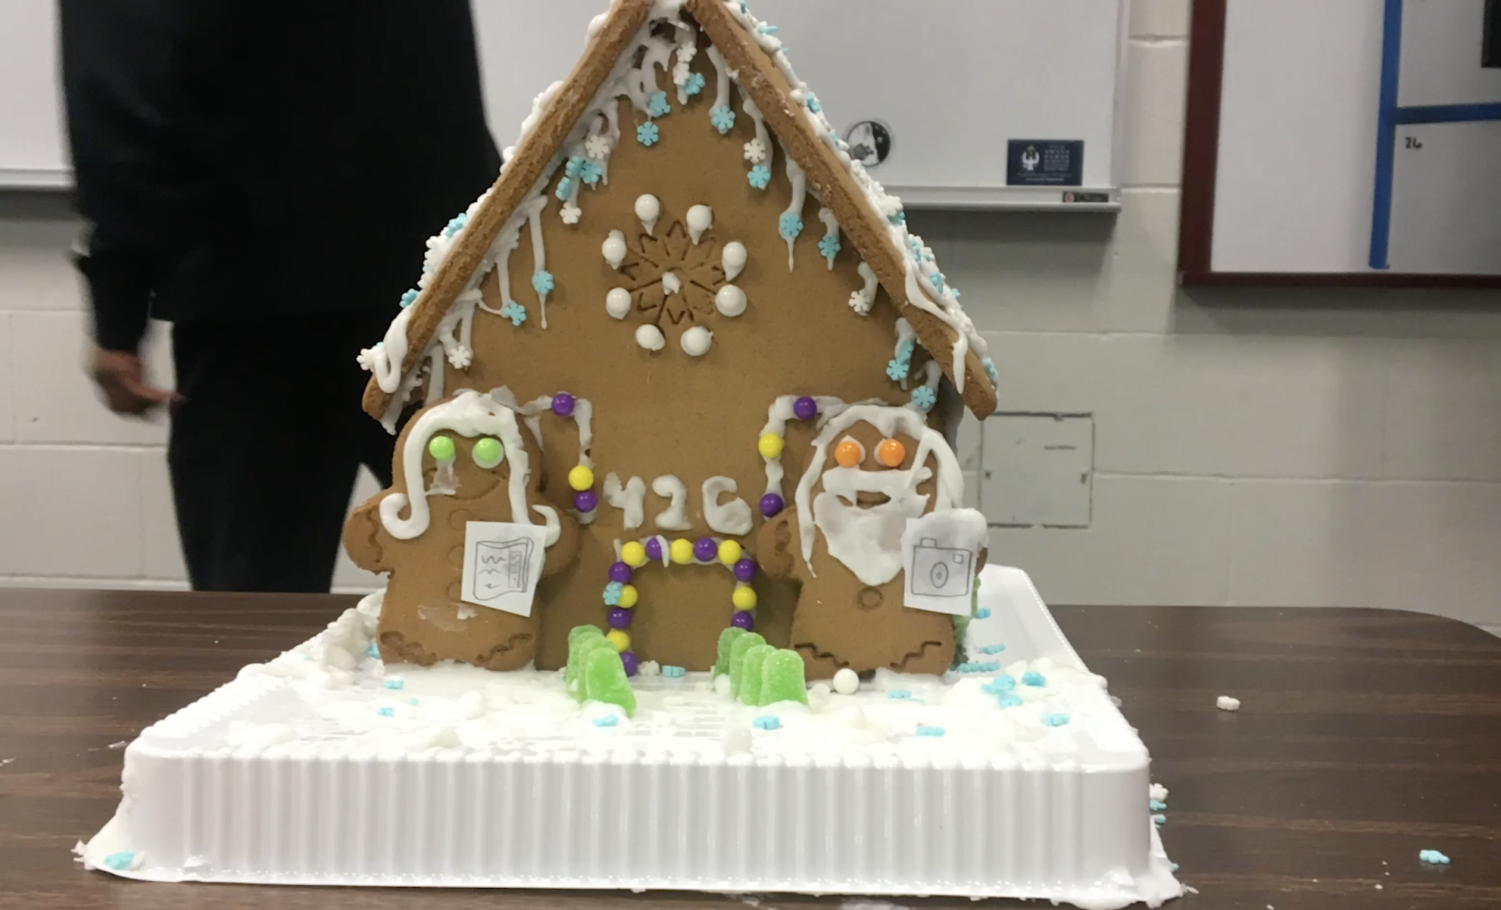 Nolan Flanigan presents the 426 Gingerbread House Building Competition 2021